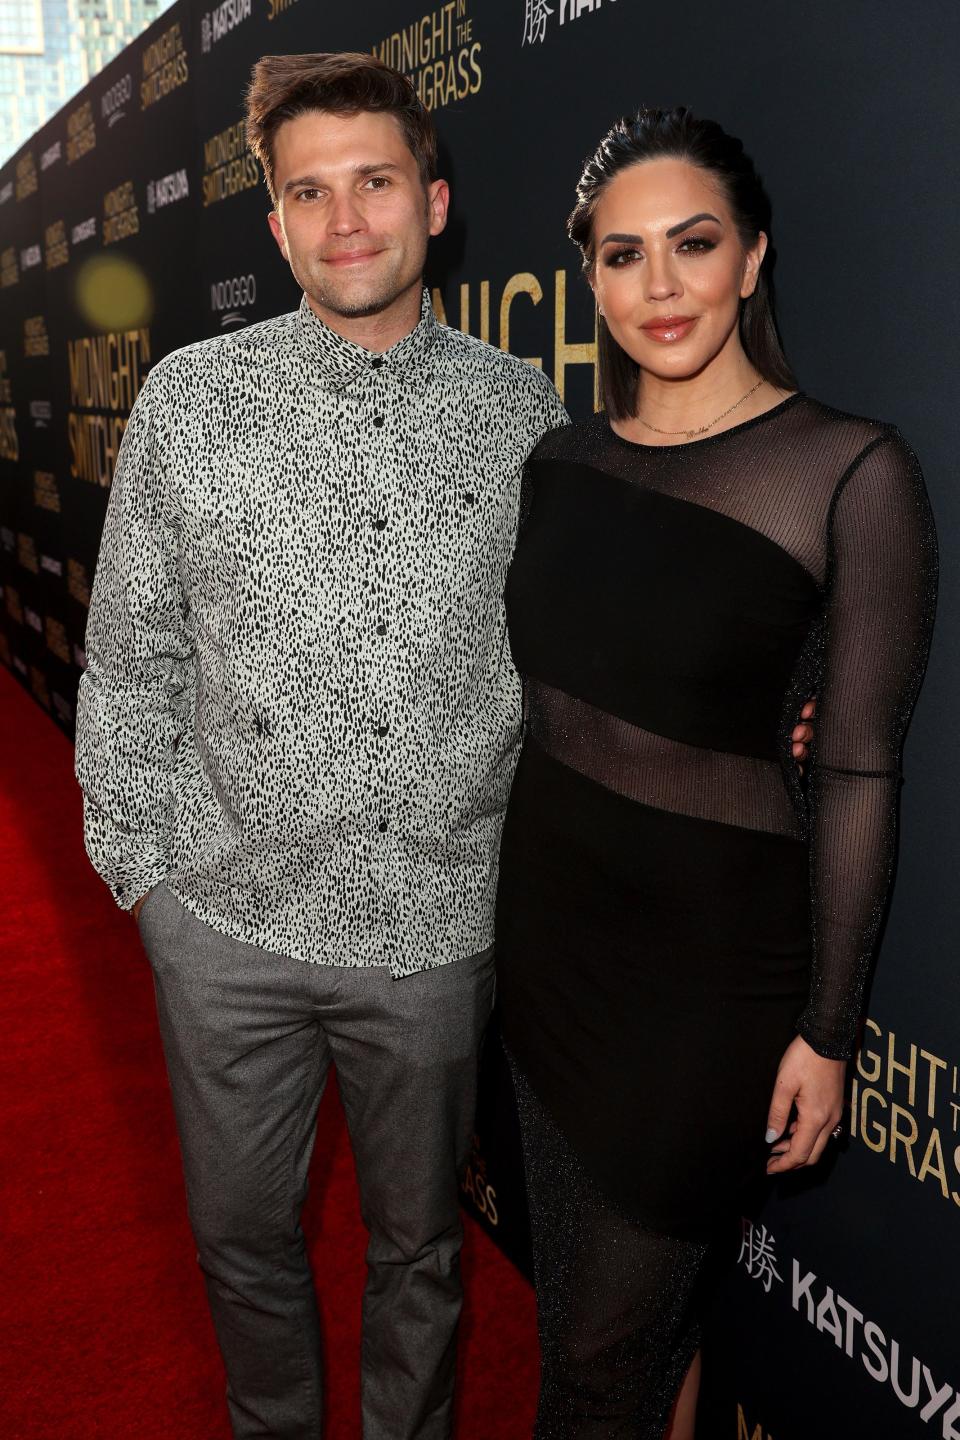 Tom Schwartz and Katie Maloney arrive at a screening of "Midnight in the Switchgrass" on July 19, 2021